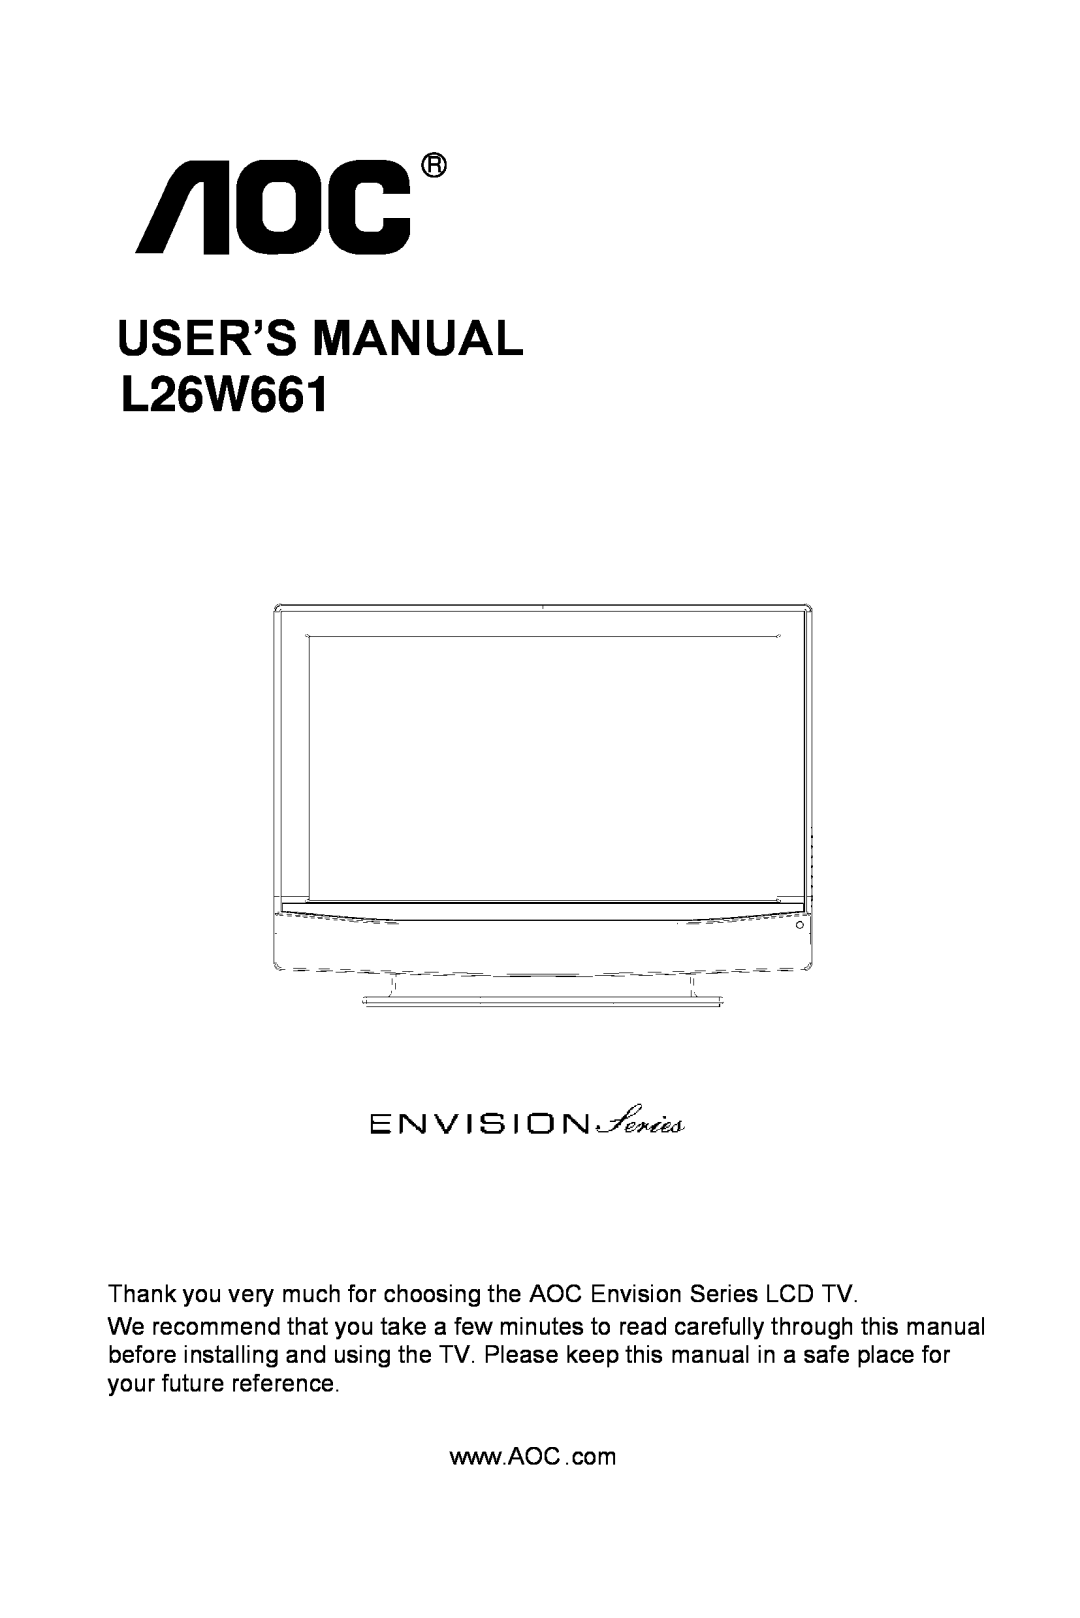 AOC user manual USER’S MANUAL L26W661, Thank you very much for choosing the AOC Envision Series LCD TV 